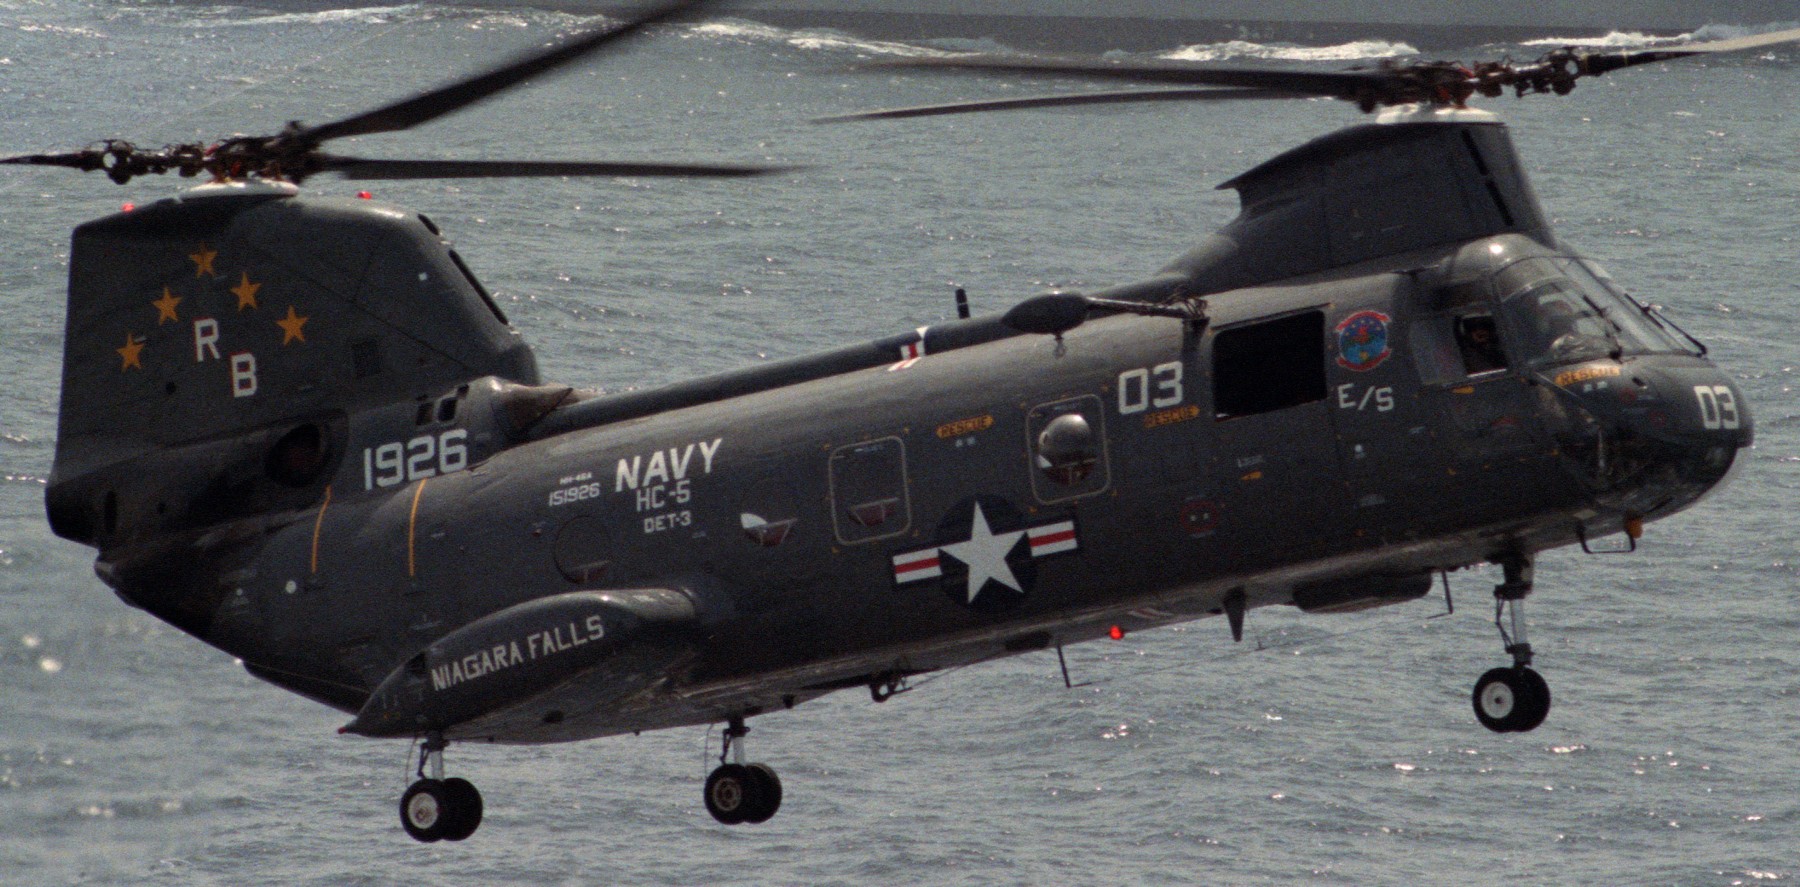 hc-5 providers helicopter combat support squadron navy ch-46 sea knight mh-60s seahawk